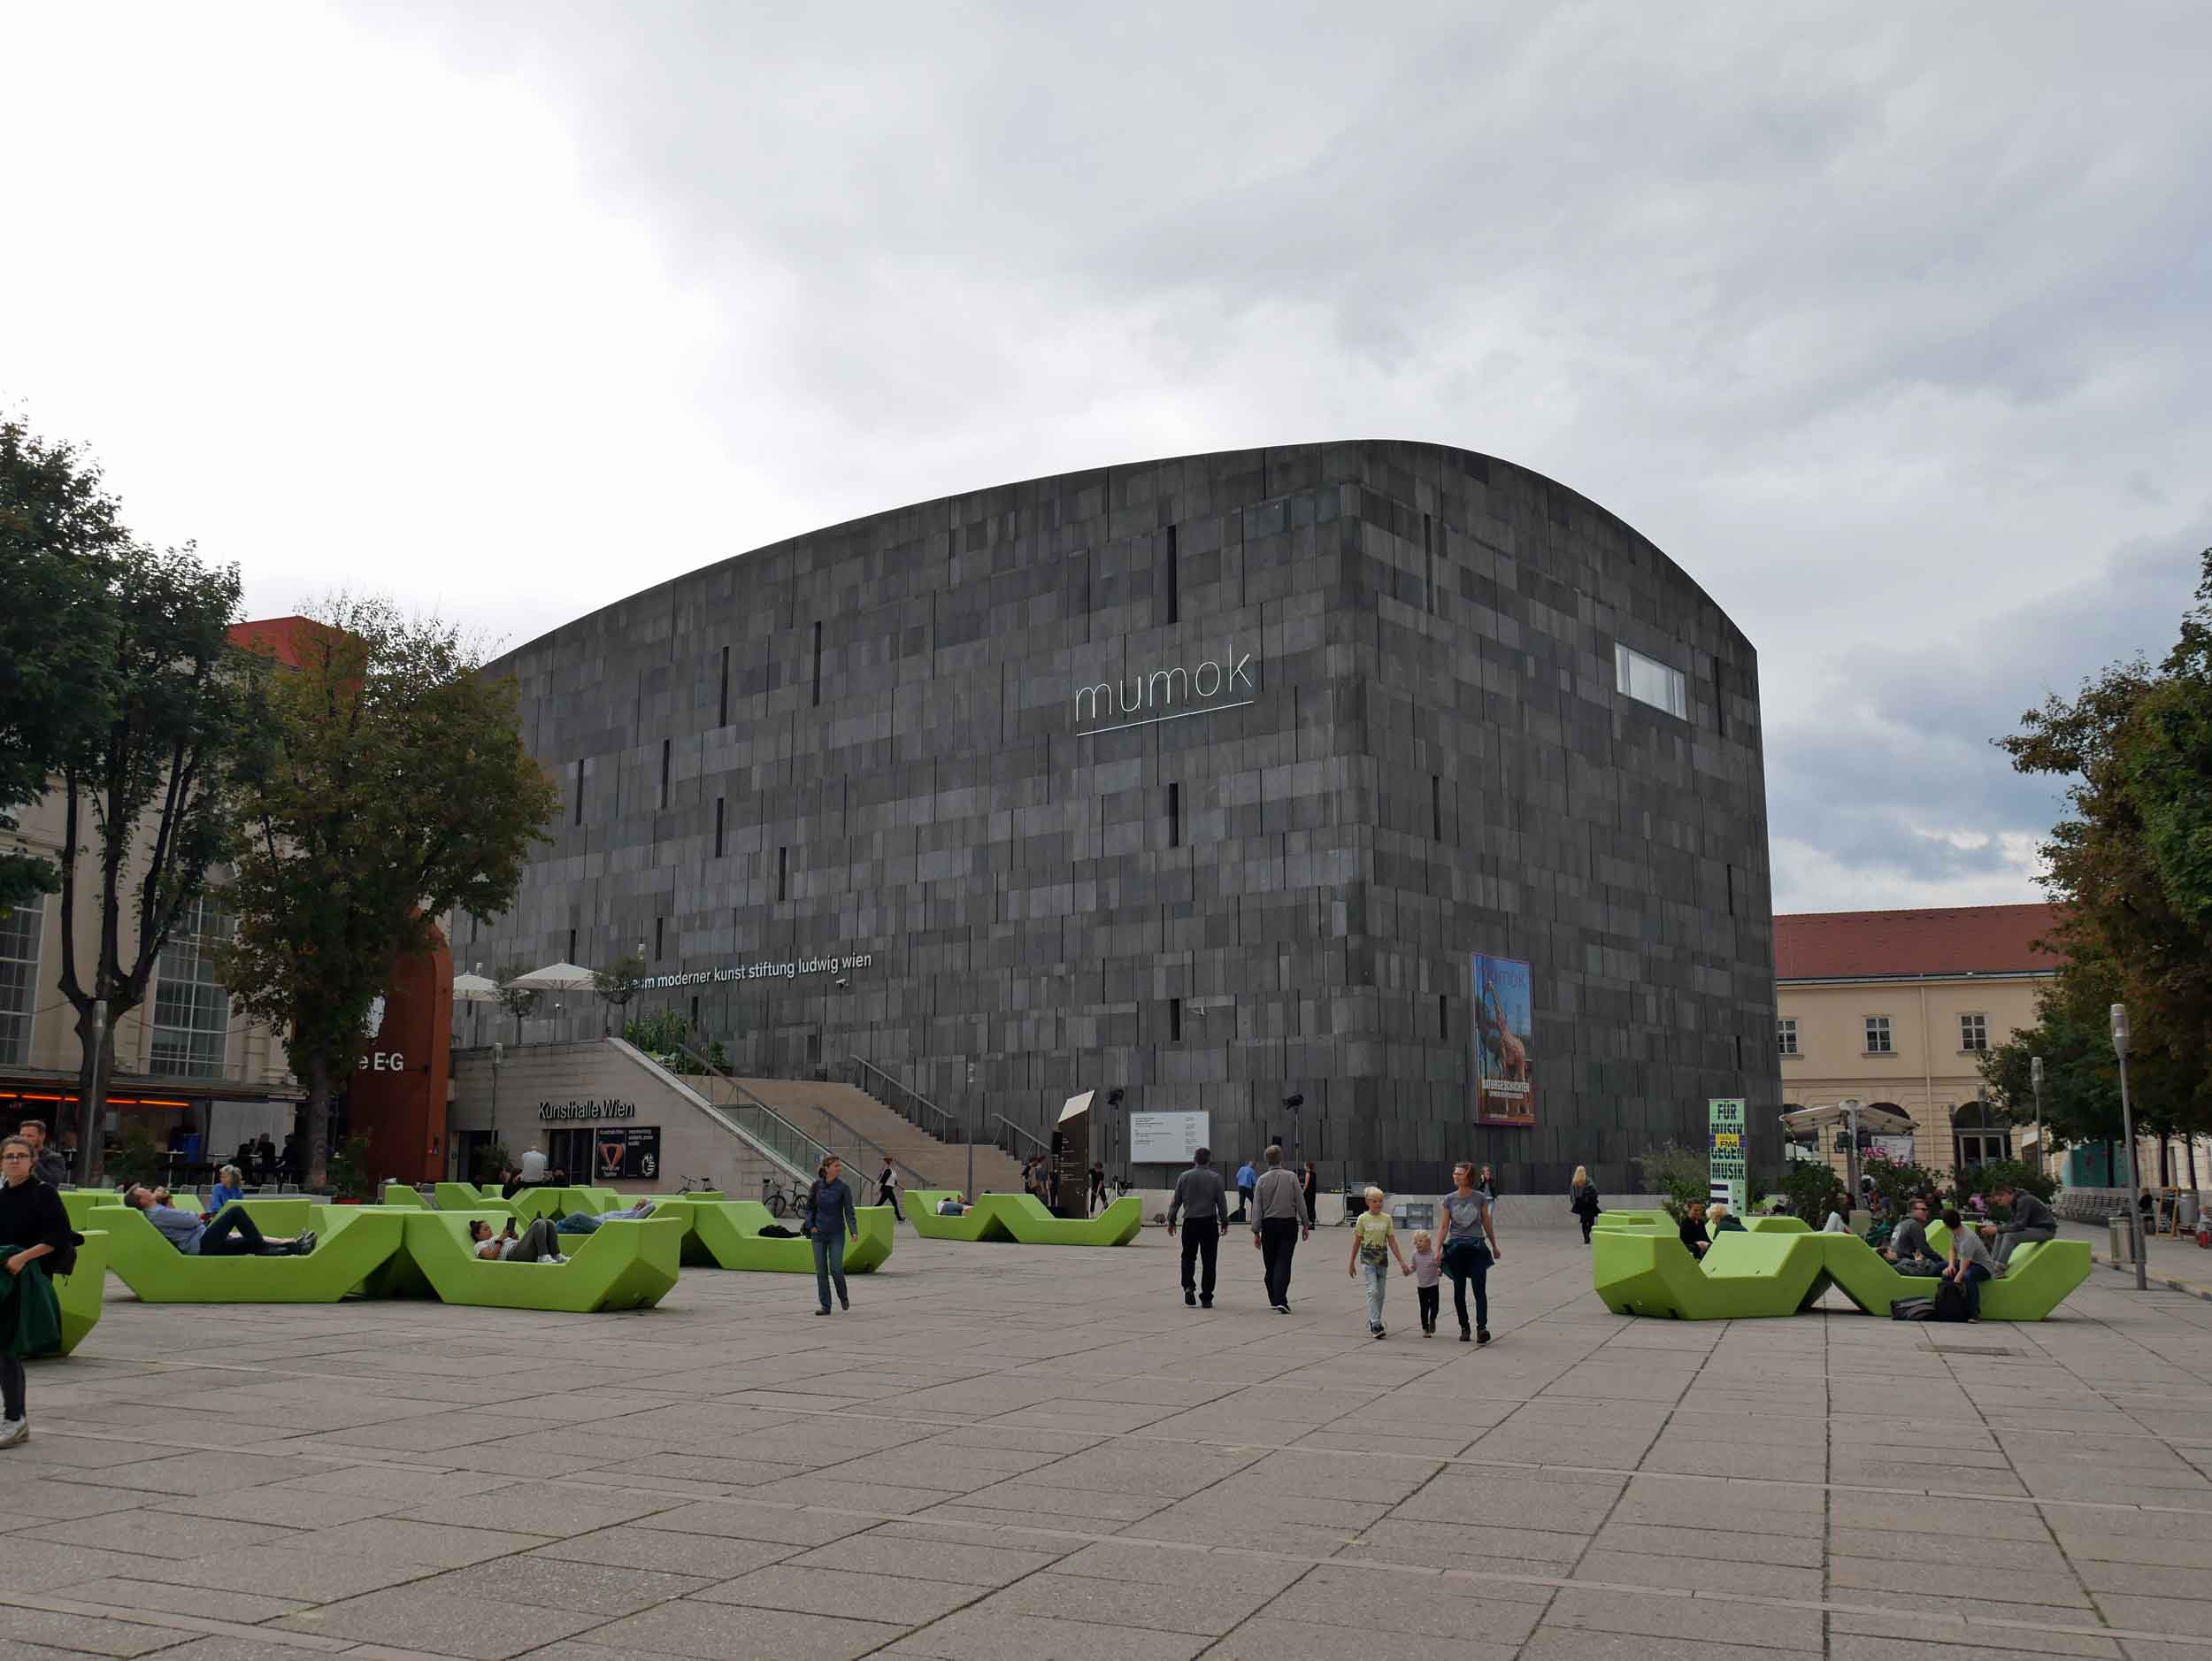  Mumok is a cutting-edge modern art museum in the city's Museumsquartier. 